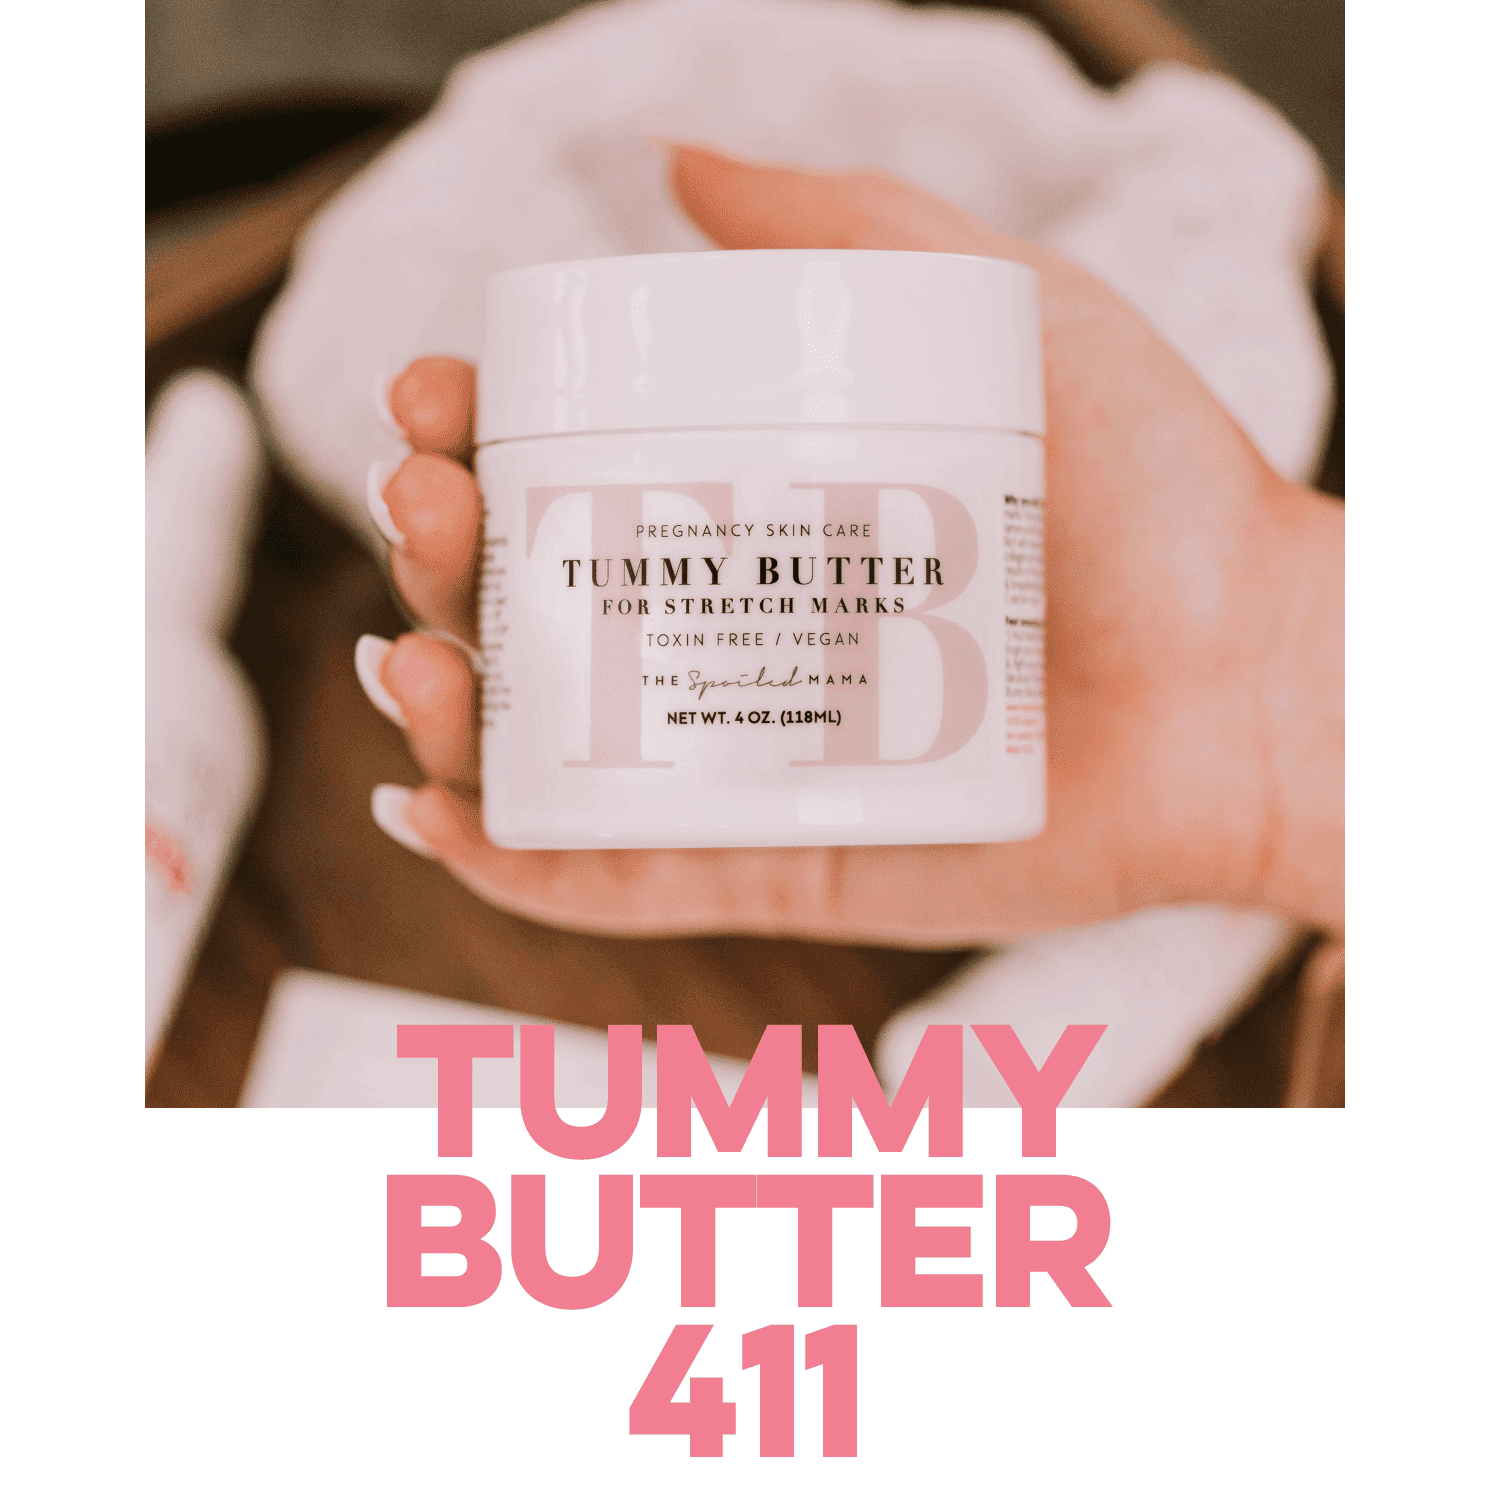 FAQ: Tummy Butter for Stretch Marks